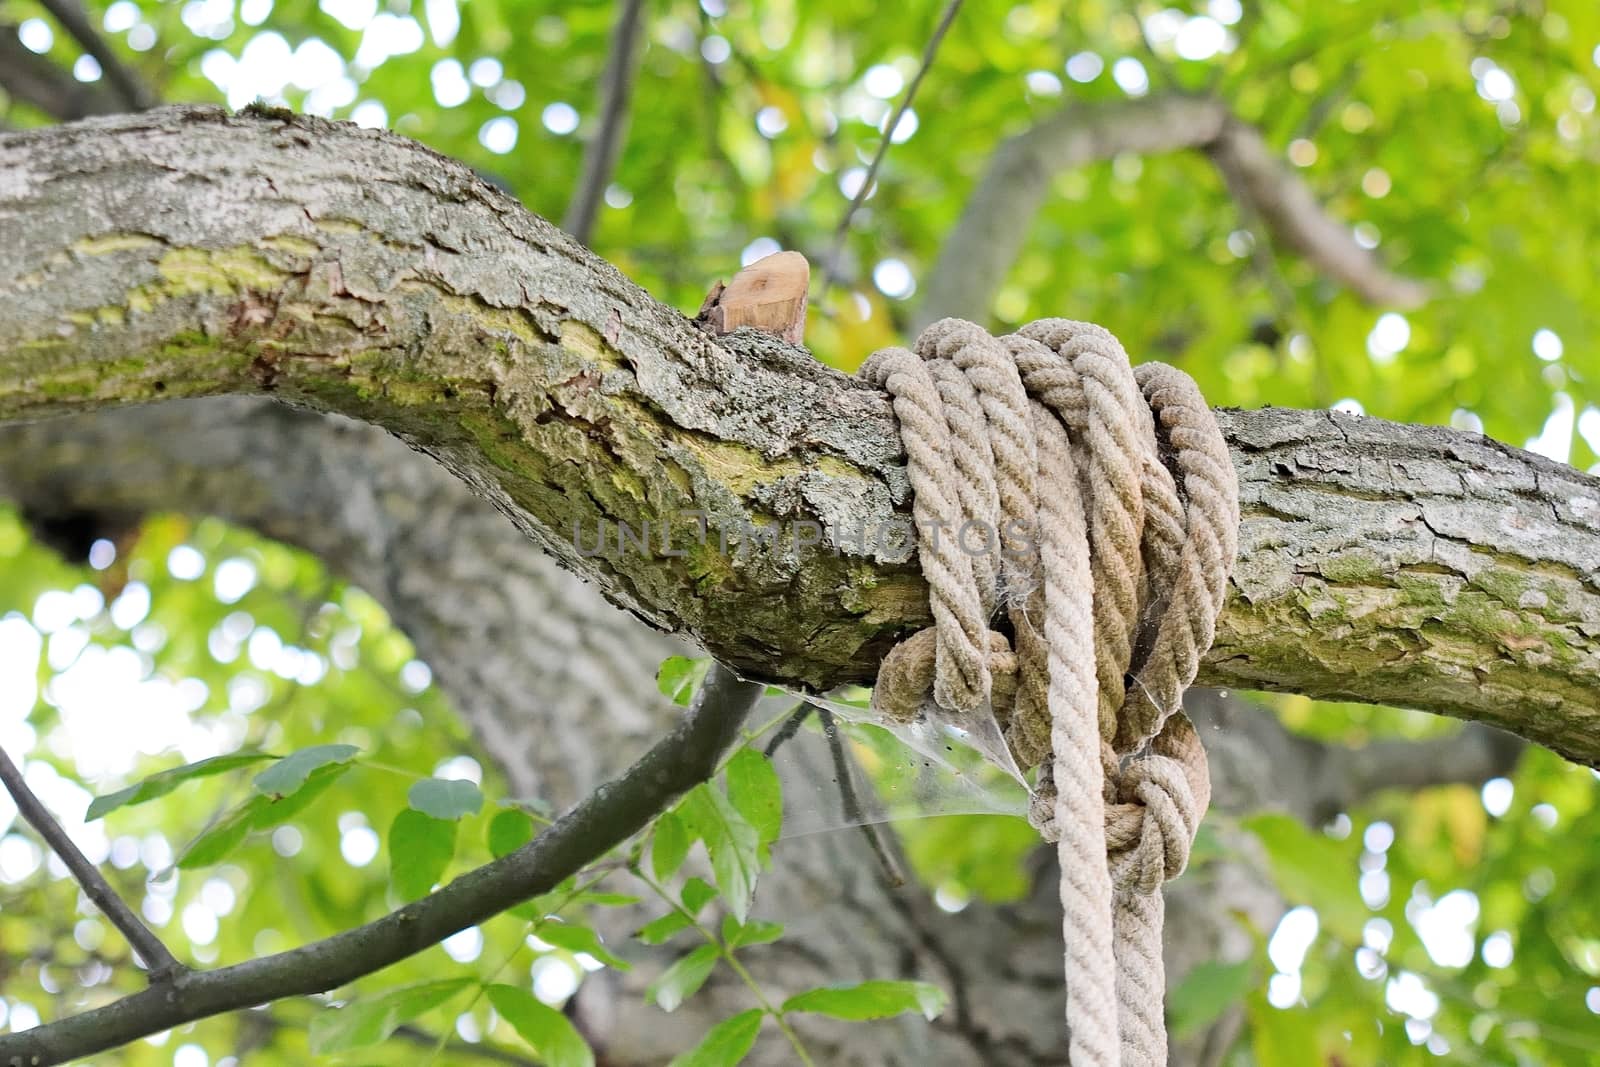 Old rope knotted around branch on tree.  